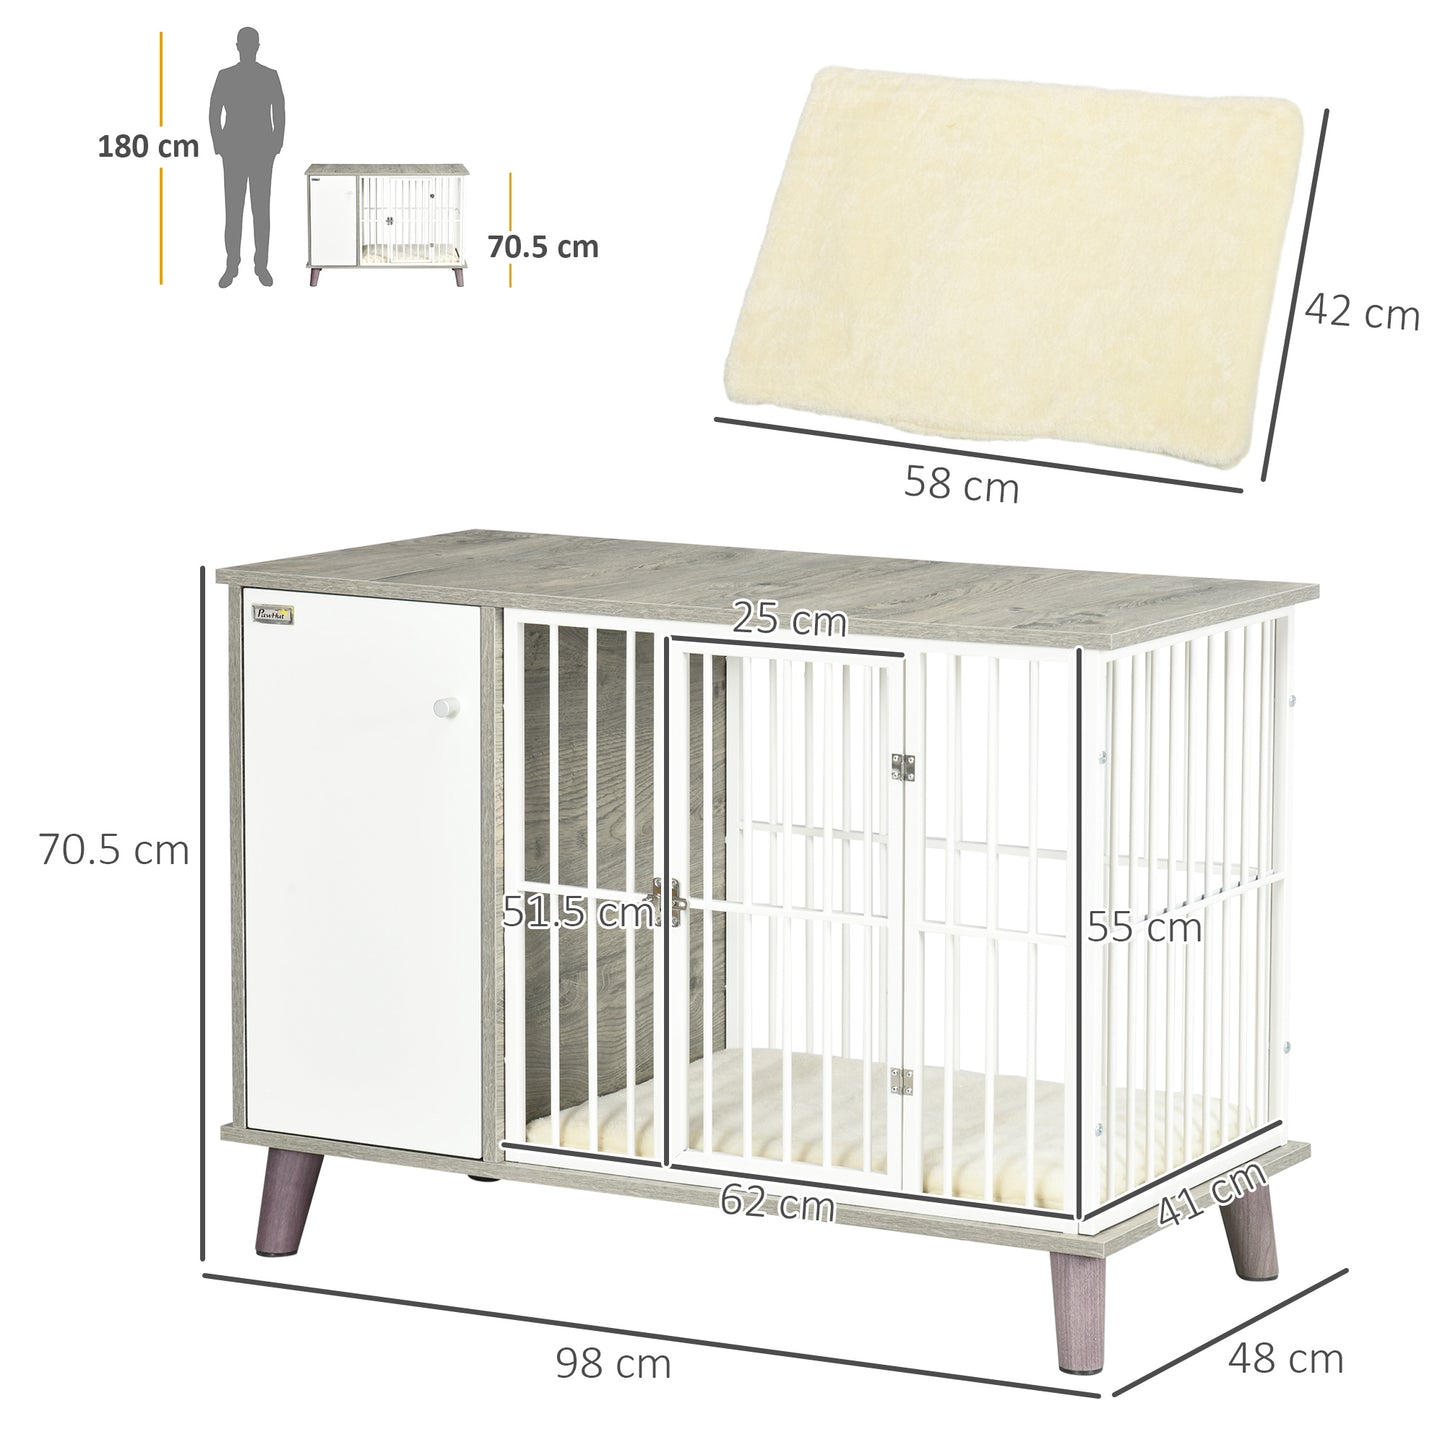 PawHut Dog Crate Furniture, Indoor Pet Kennel Cage, Top End Table w/ Soft Cushion, Lockable Door, for Small Dogs, 98 x 48 x 70.5 cm - Grey